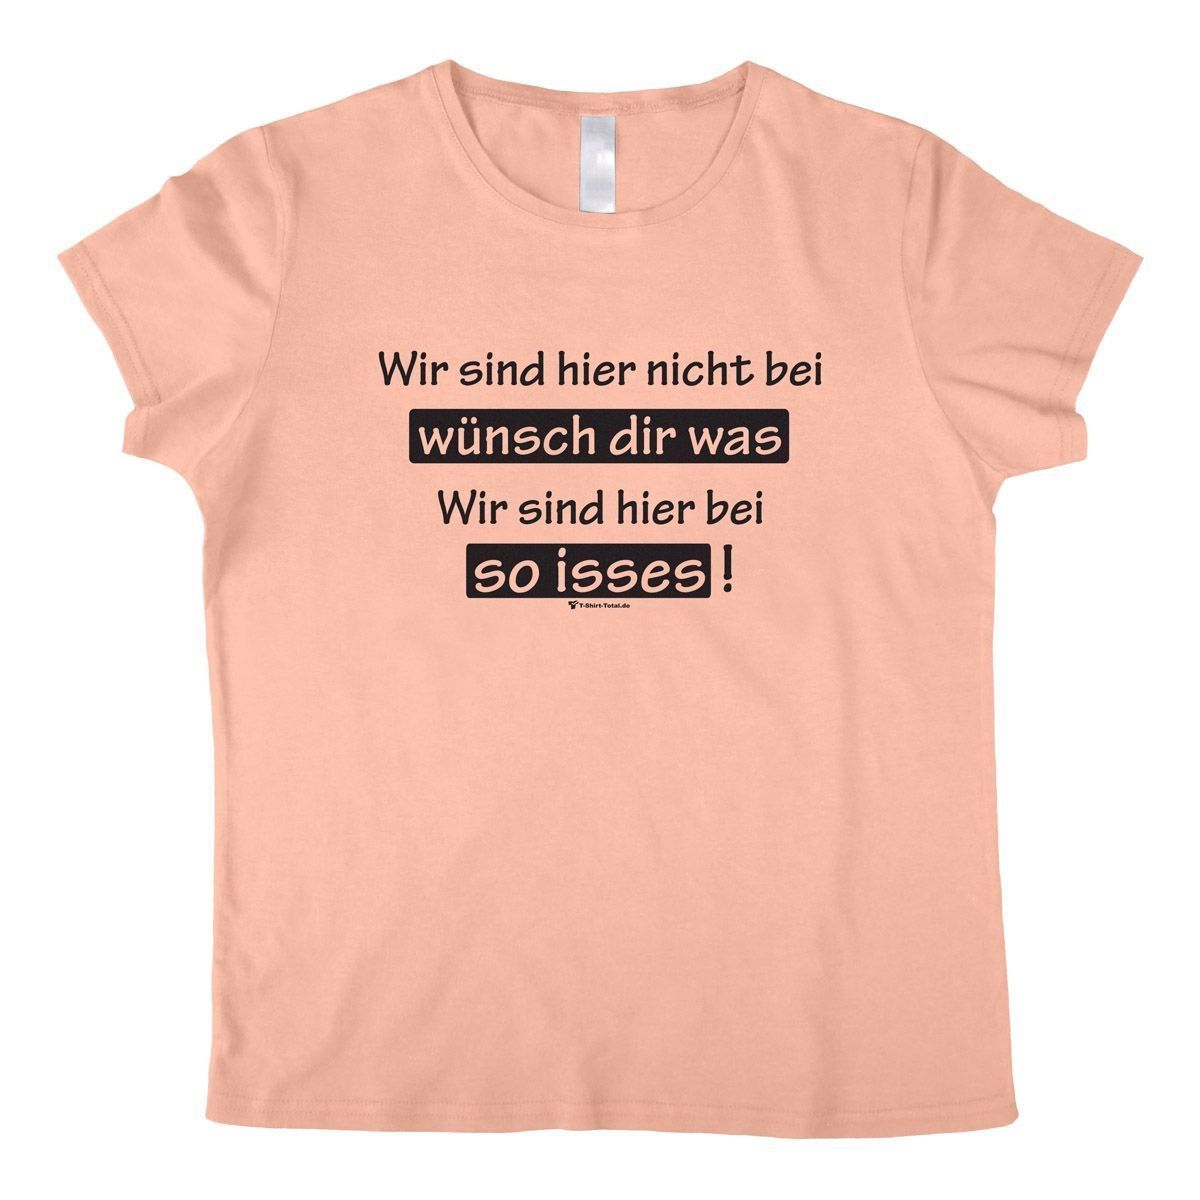 So isses Woman T-Shirt rosa Extra Large